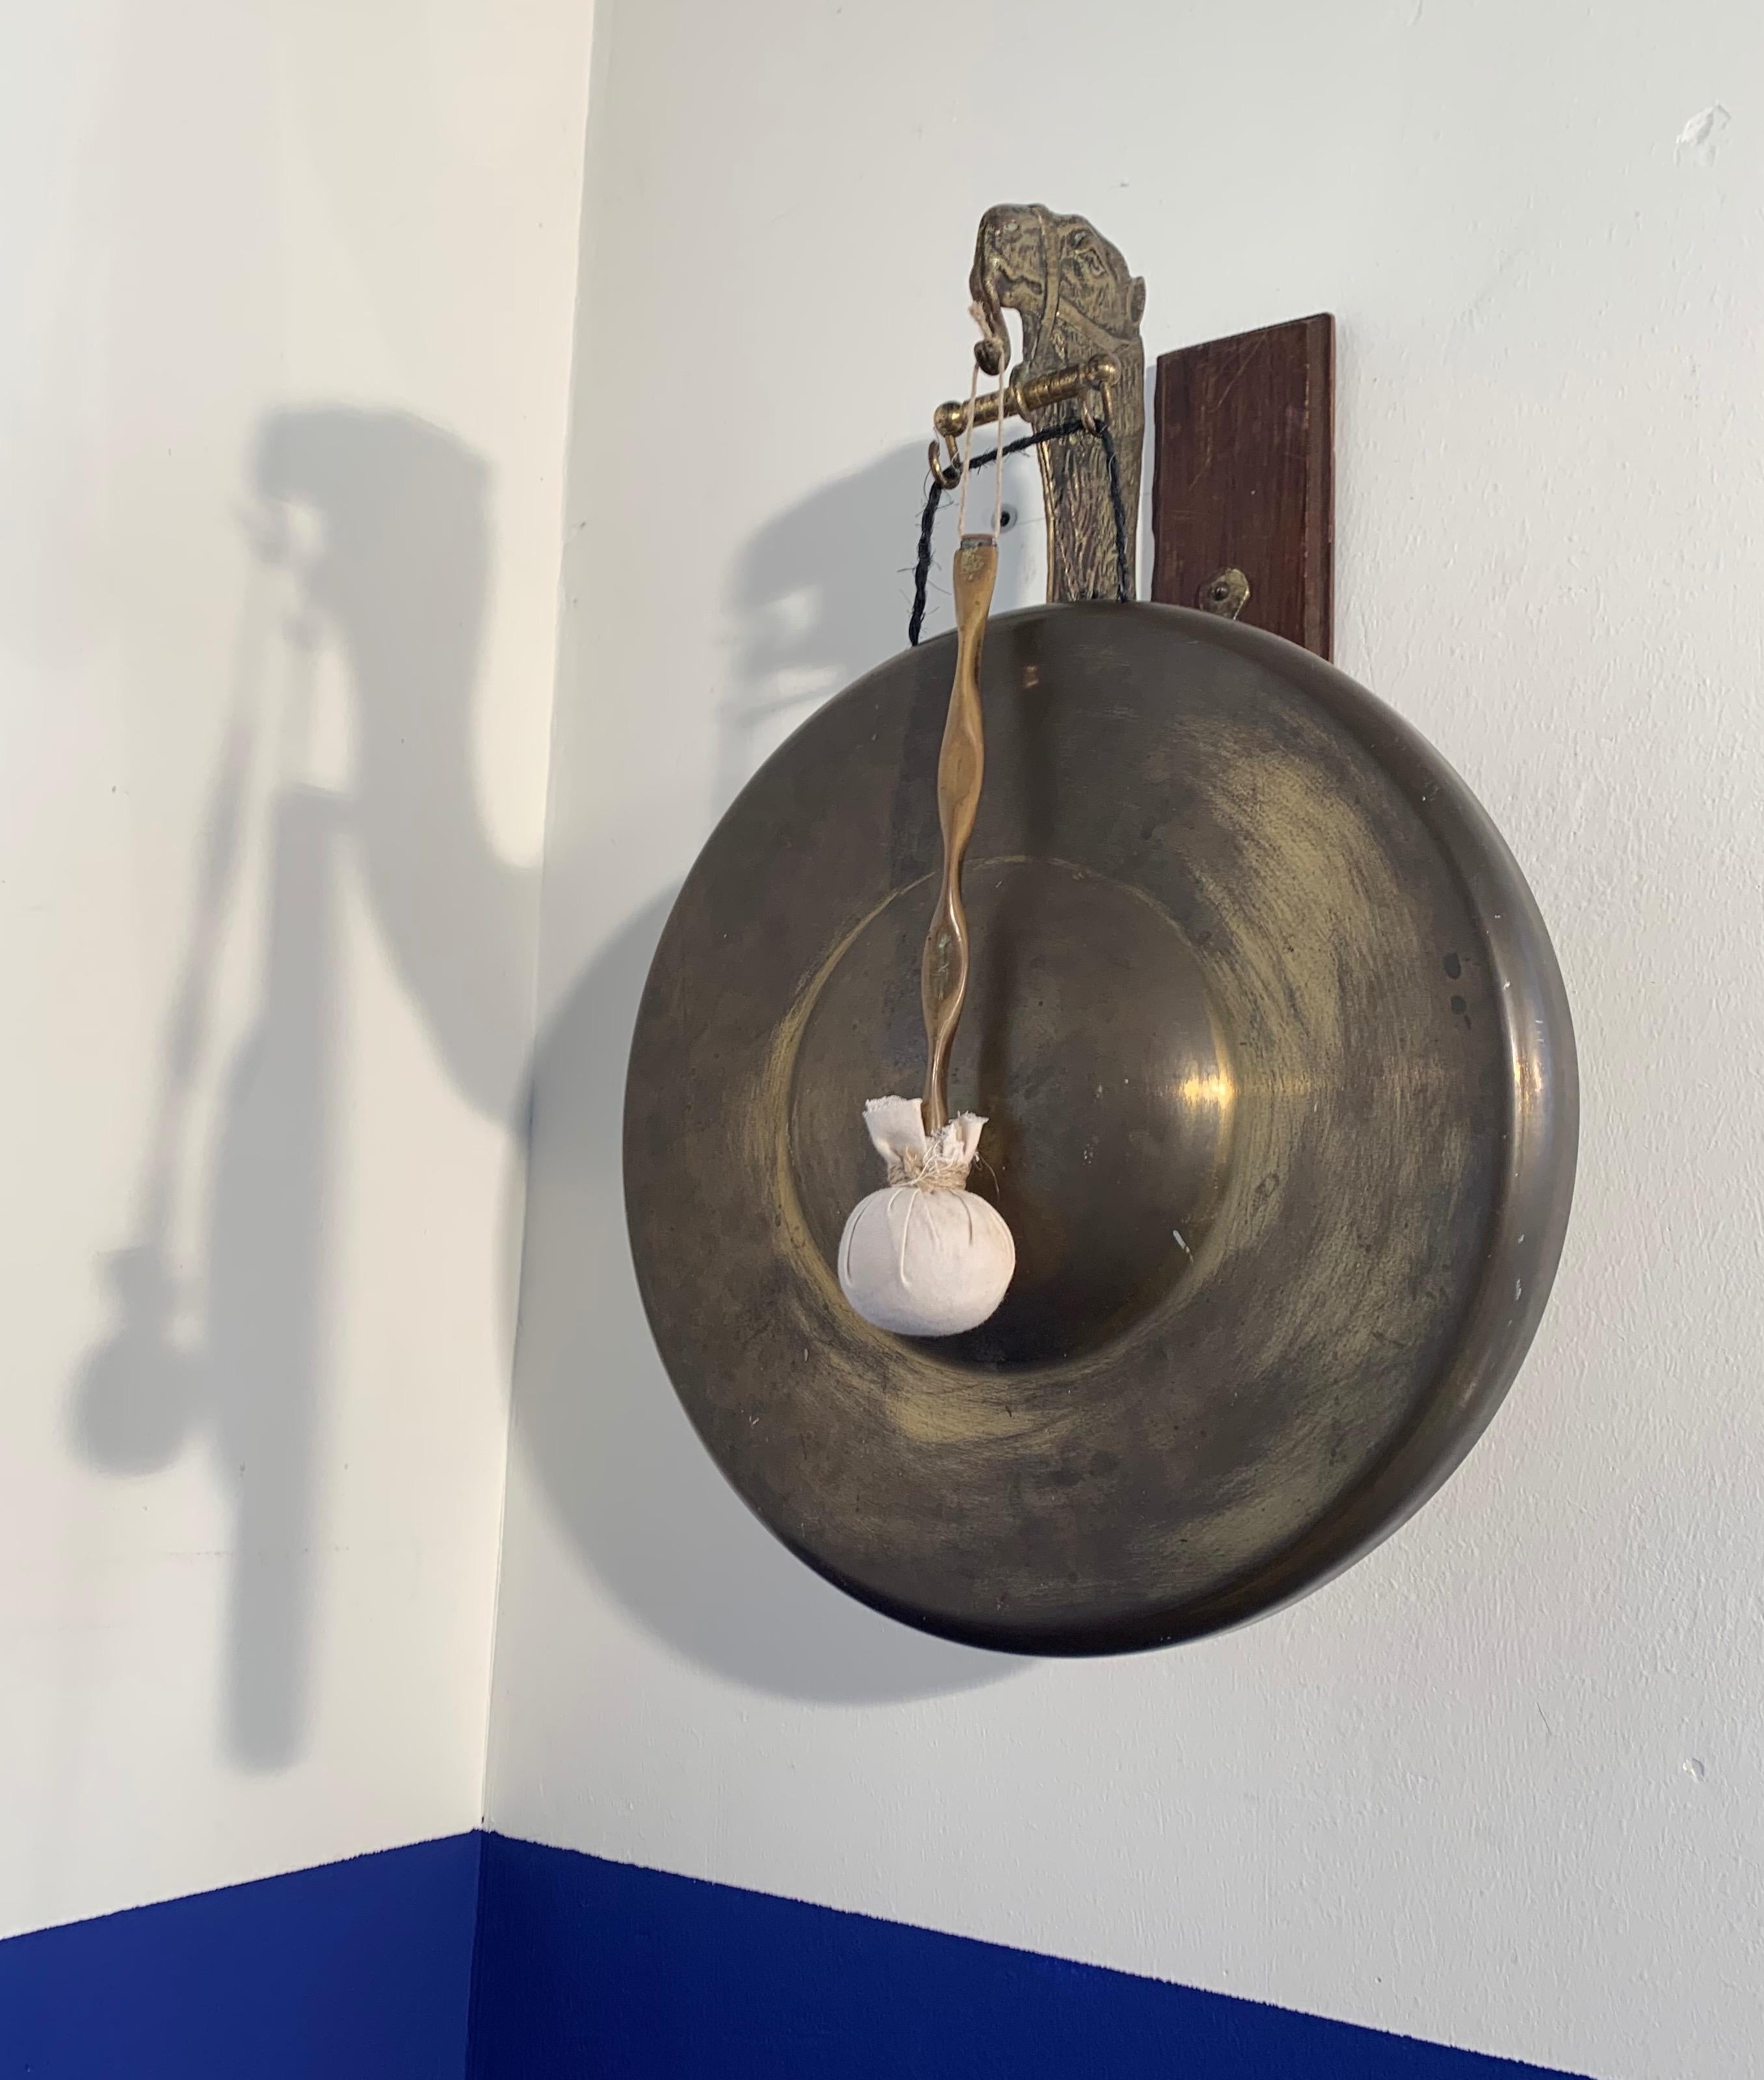 Very rare and striking (pun intended) Arts & Crafts gong.

This totally original house gong with a camel sculpture even comes with the original and perfect condition striker. The beautifully patinated camel and gong are a real joy to look at and